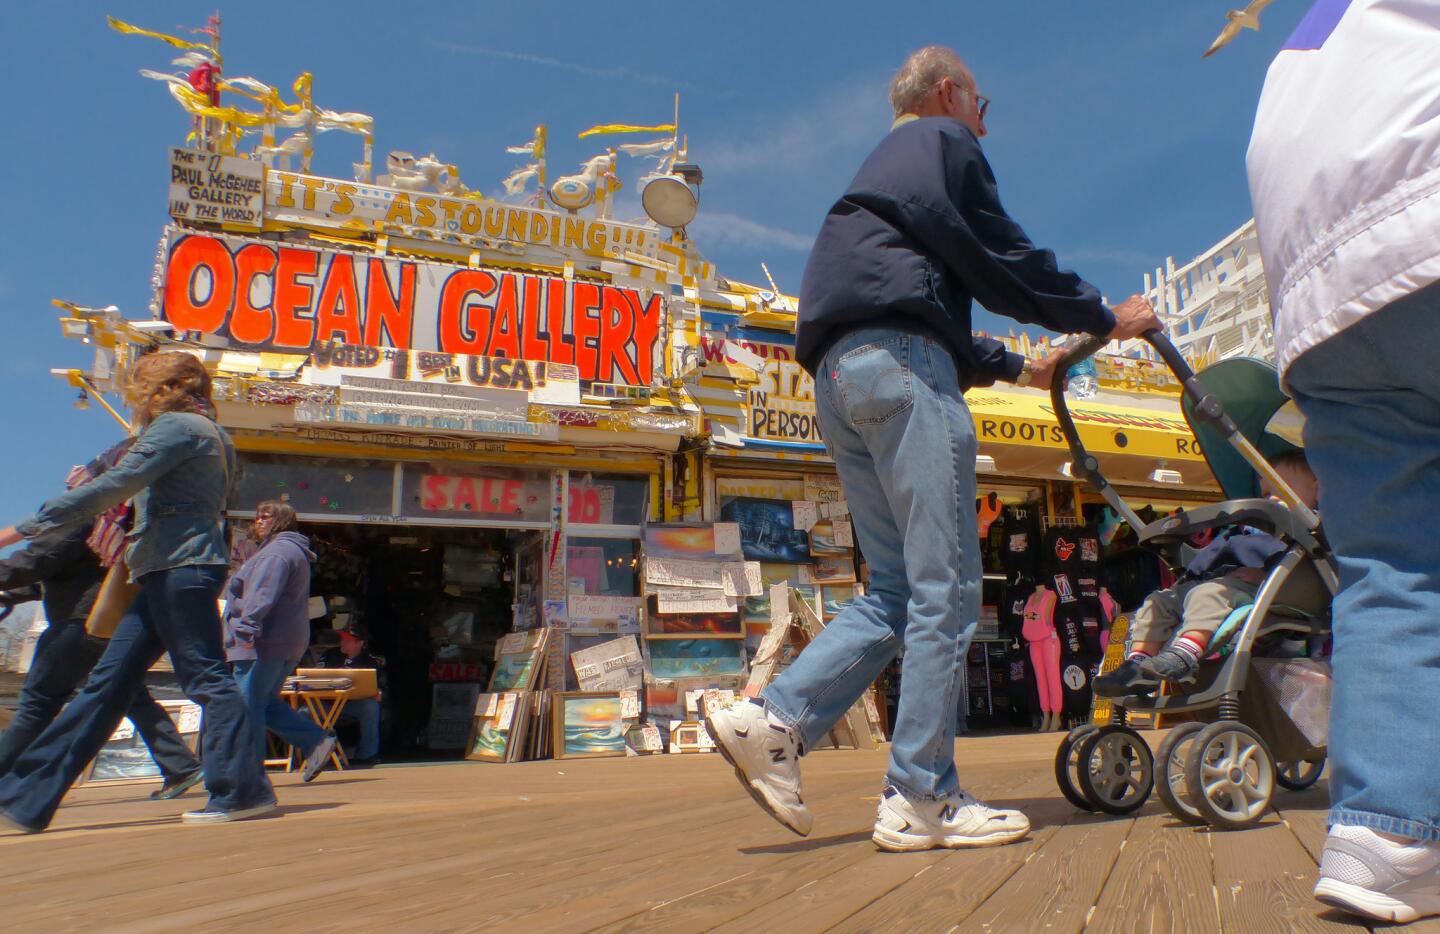 No stroll down the boards is complete without a stop into Ocean Gallery, the jam-packed art gallery that has been an O.C. staple for decades. “We’re an icon of the boardwalk,” says owner Joe Kro-Art. Lucky visitors might just find themselves on film, too. “Ocean Gallery is globally famous,” says Kro-Art, rattling off TV shows and movies that have featured the spot. Second Street and the boardwalk, 410-289-5300, oceangallery.com